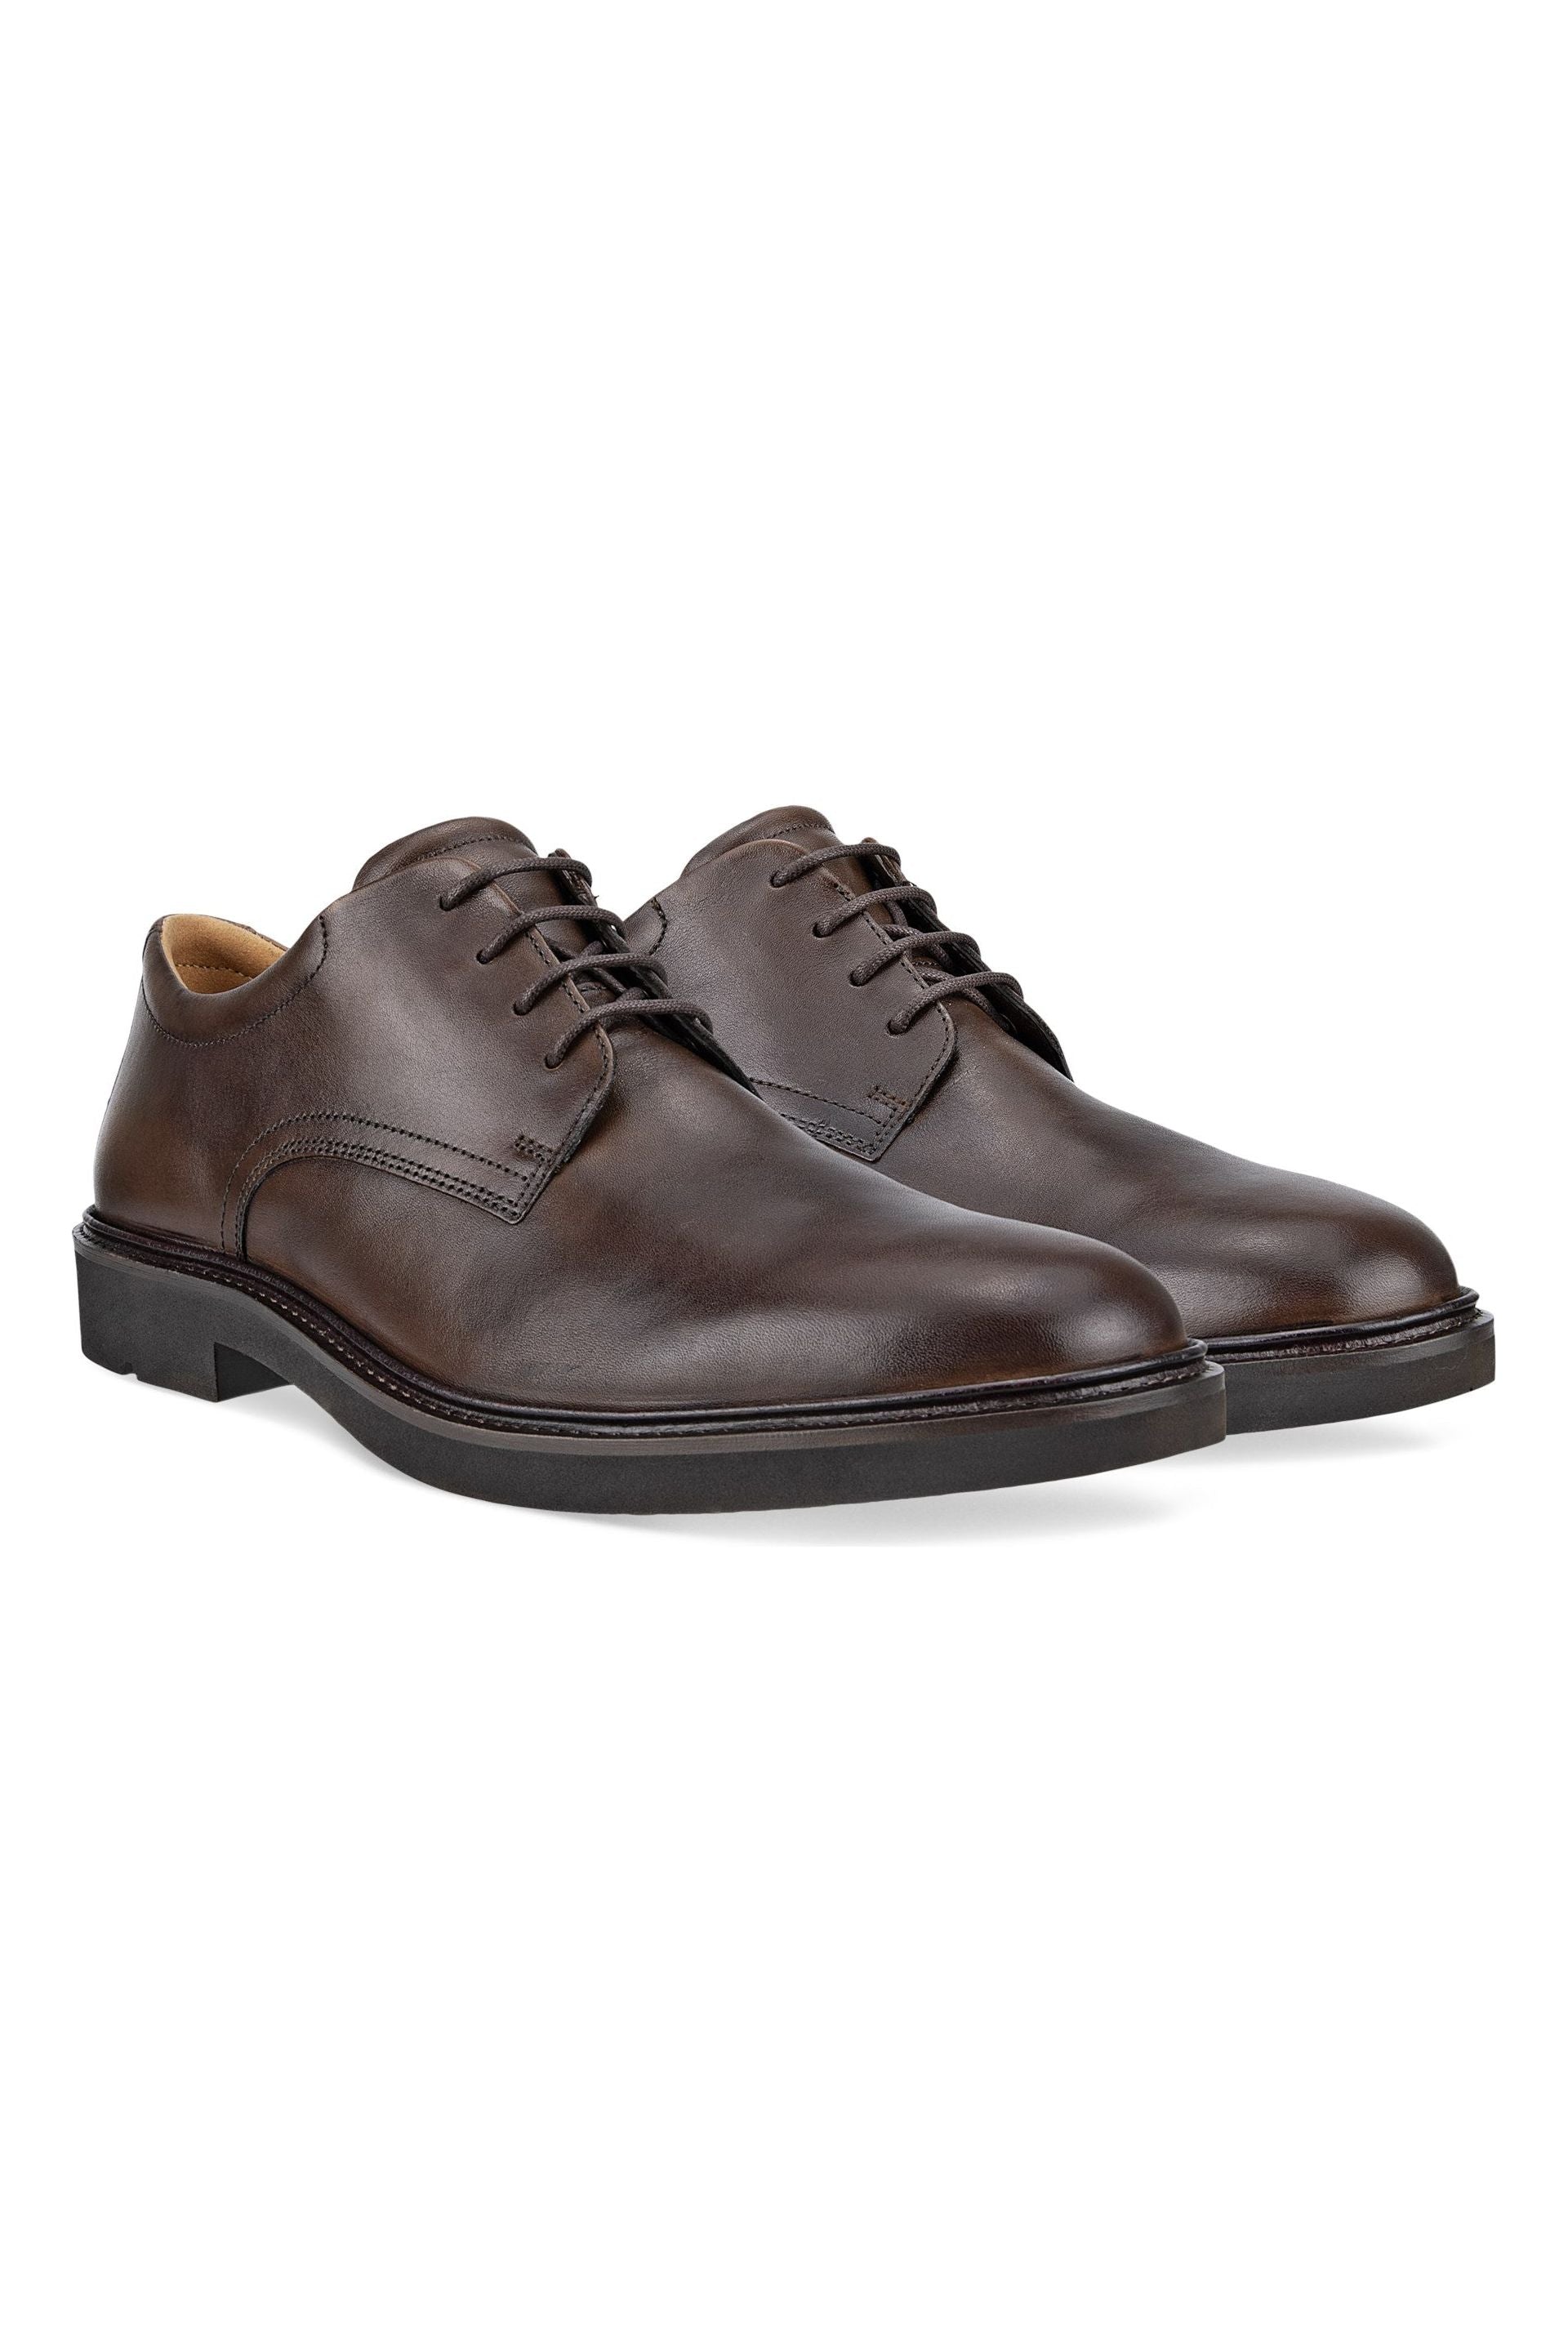 Ecco 525604-01482 Smart Brown Leather shoes